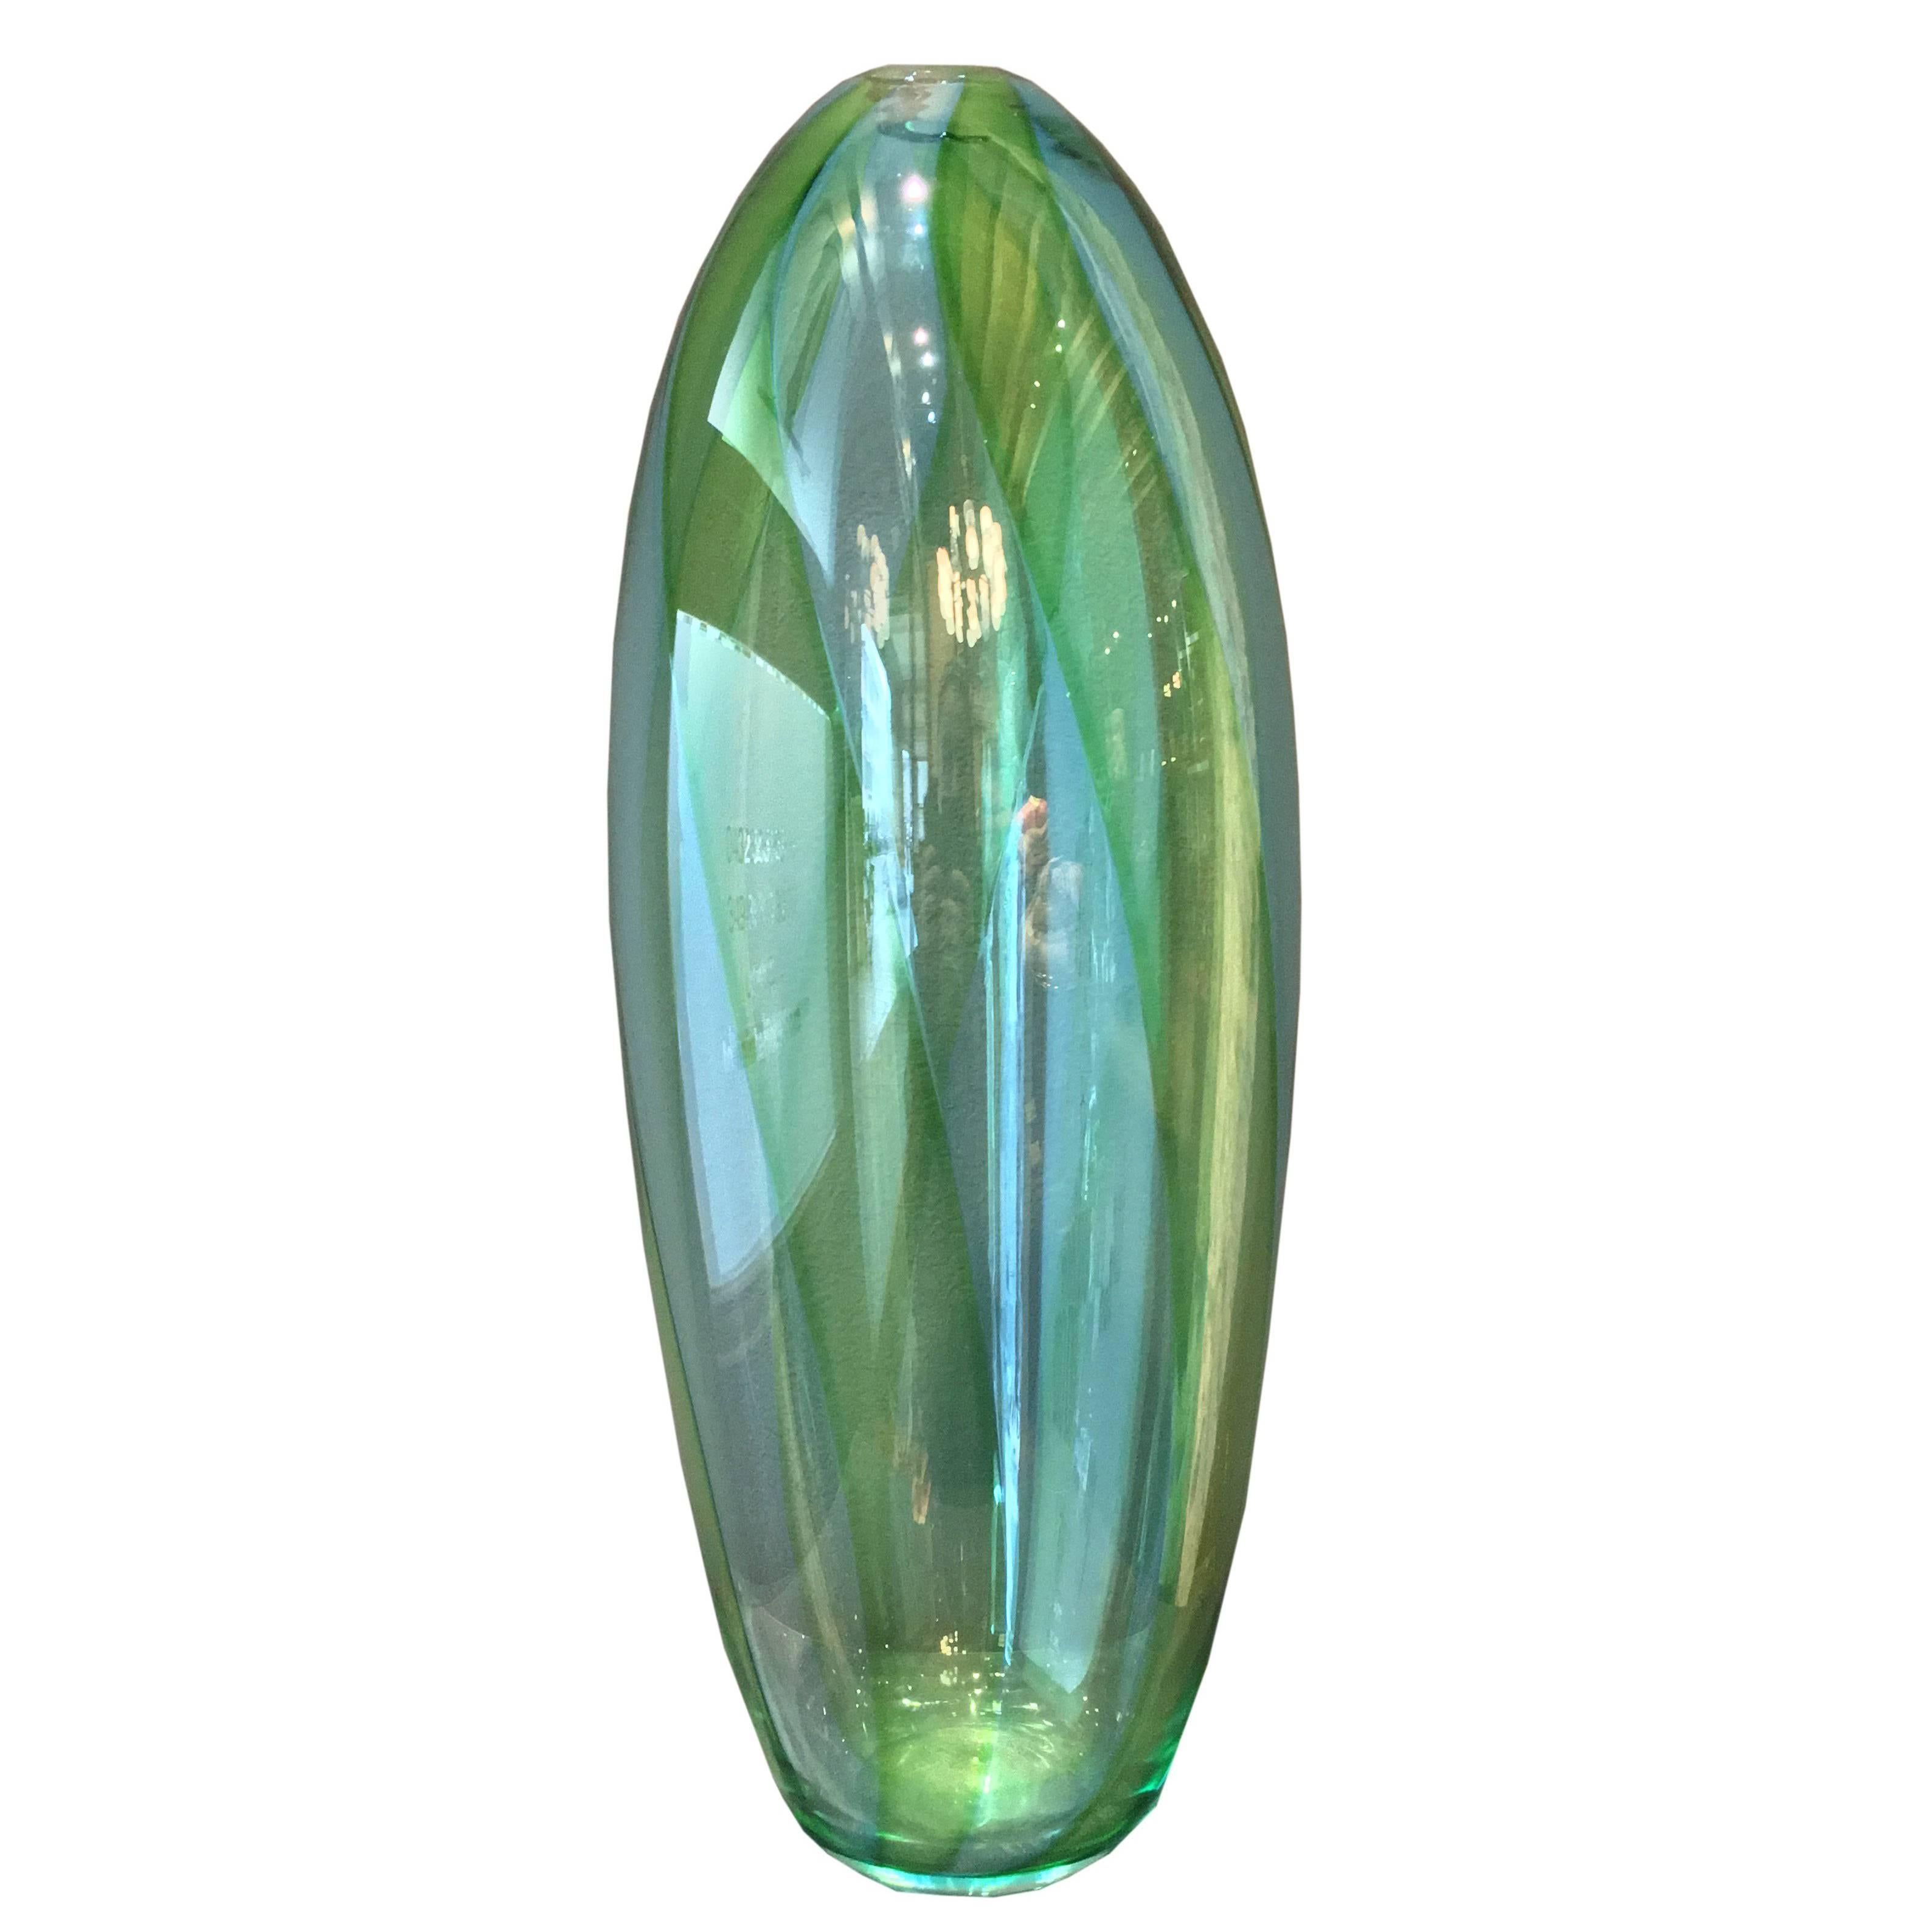 Formia Murano Venice Vintage Light Green Blue Blown Glass Vase, 20th Century For Sale